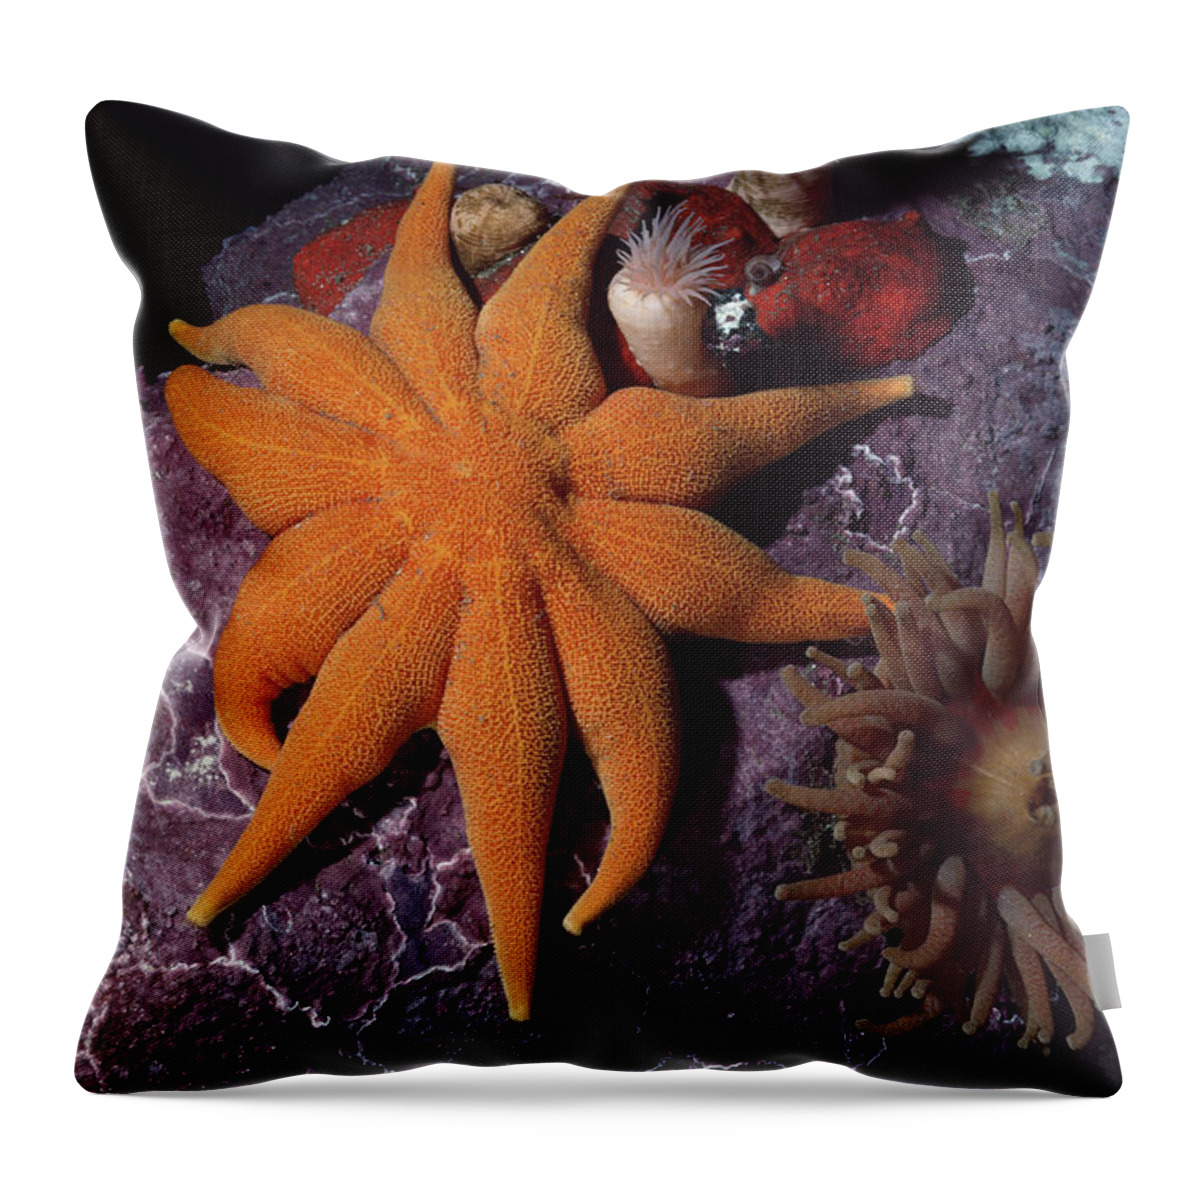 00084851 Throw Pillow featuring the photograph Sea Star Anemones And Coralline Algae by Flip Nicklin